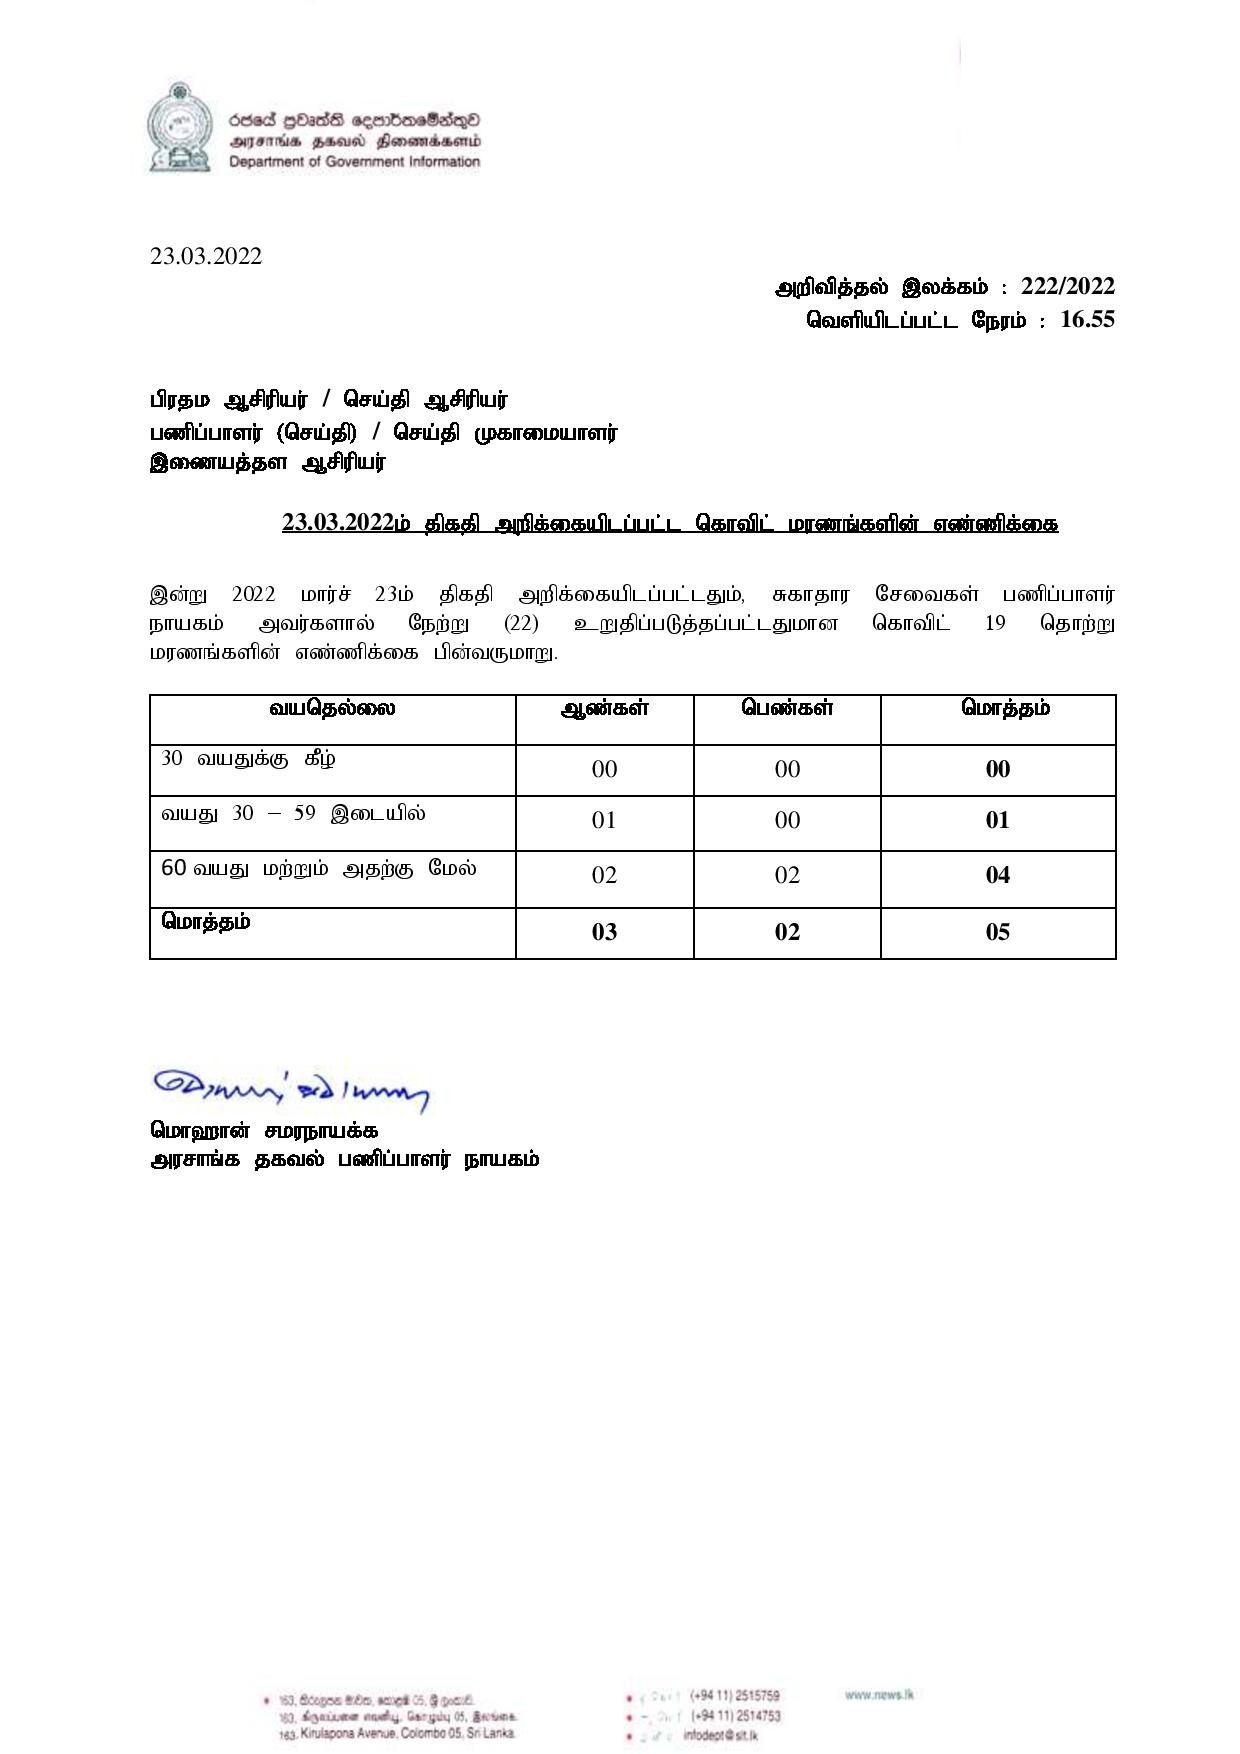 Release No 222Tamil page 001